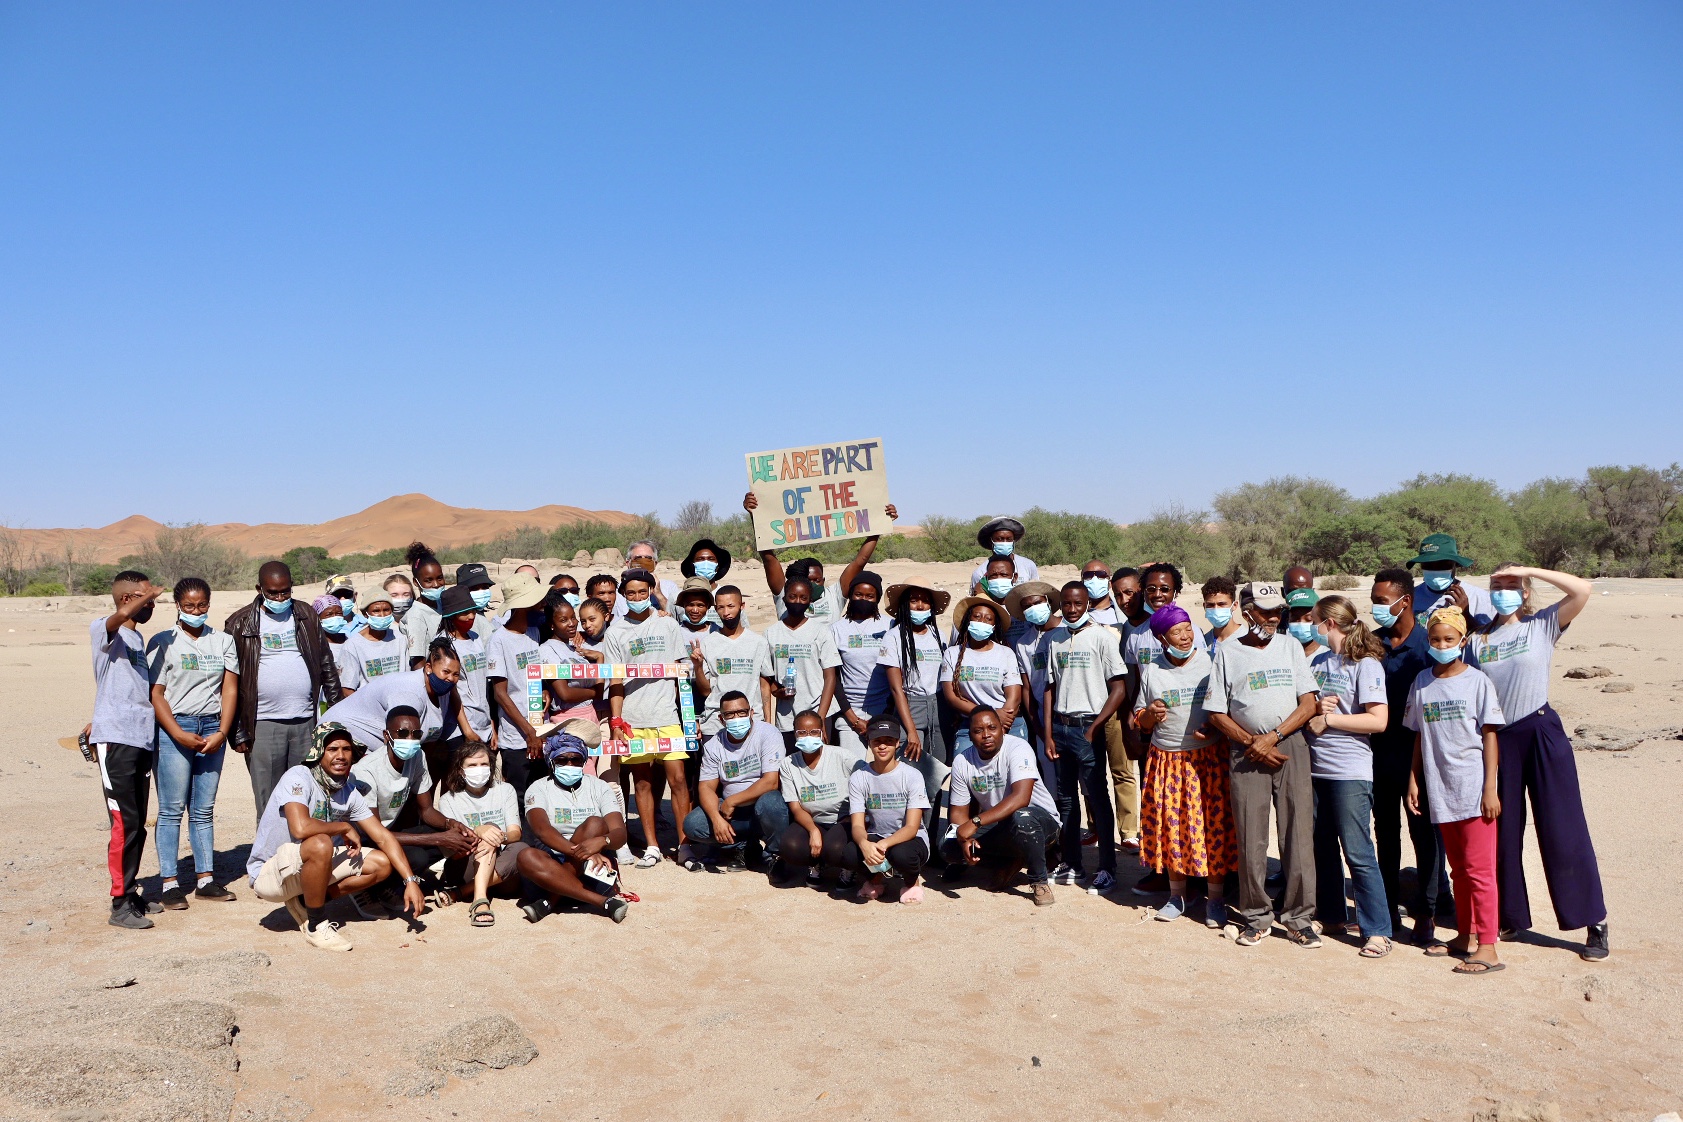 A group photo from Biodiversity Action Week at Gobabeb Namib Research Institute.